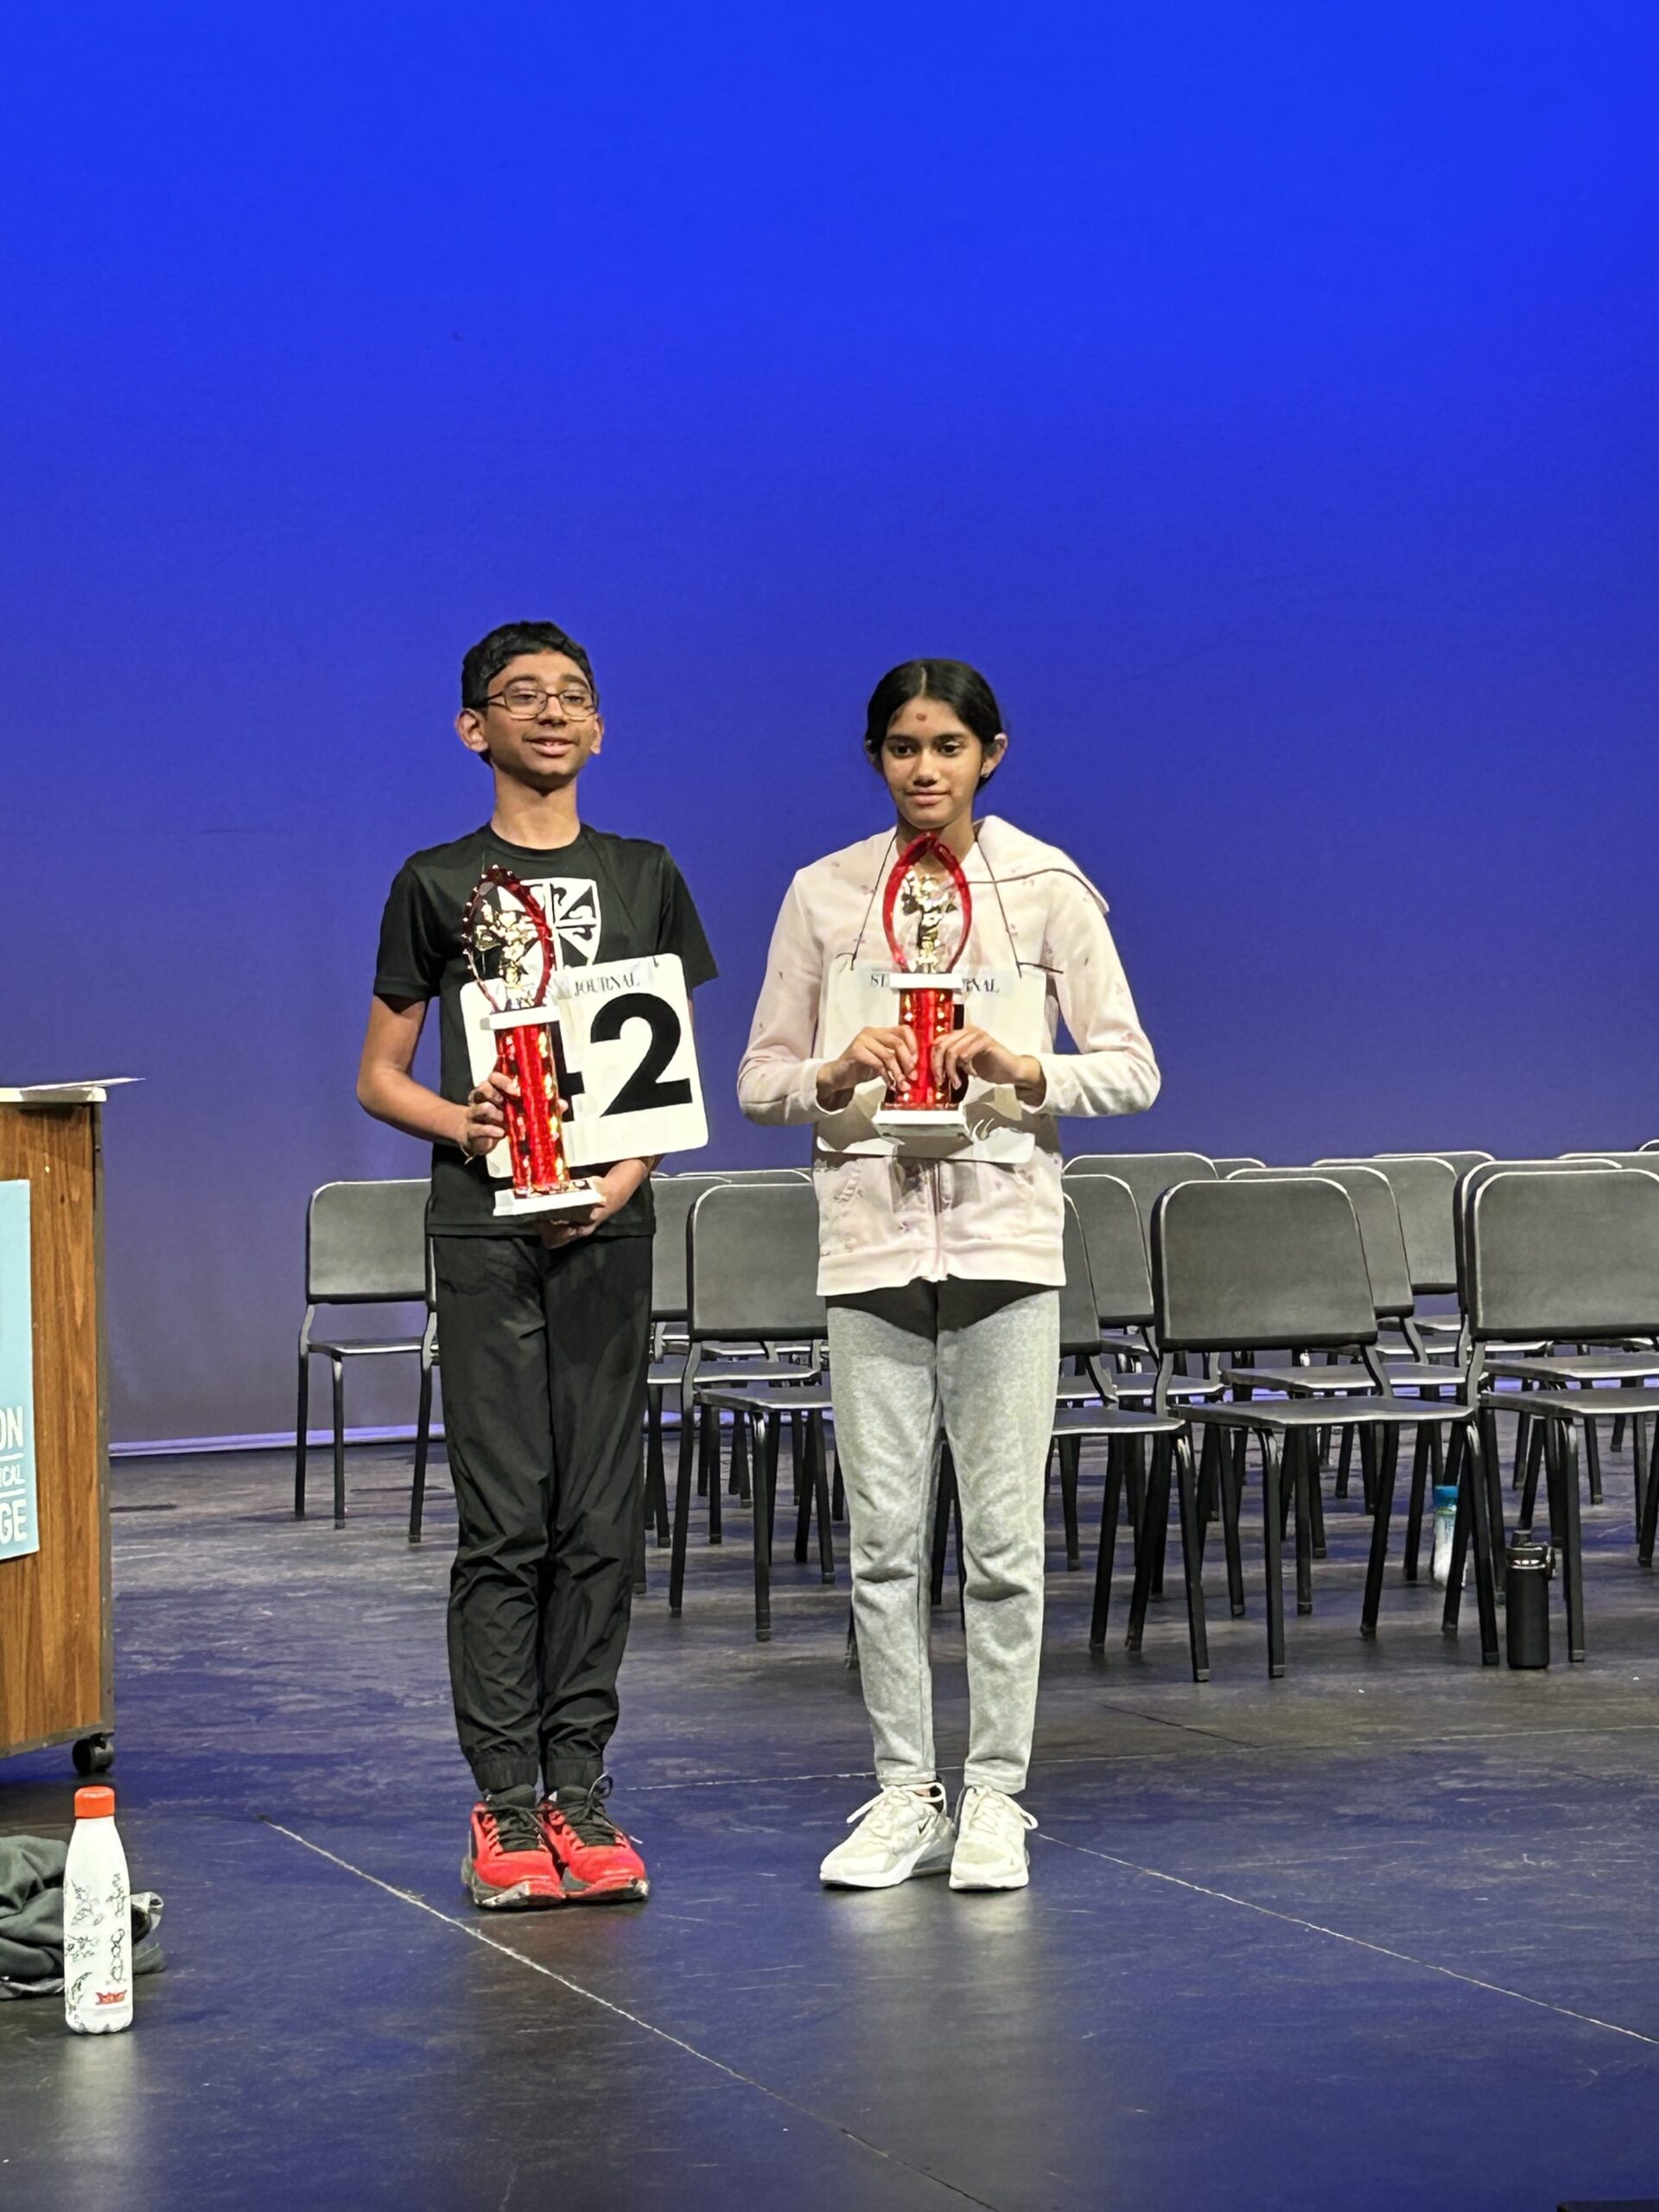 2 Wisconsin teens are headed to the Scripps National Spelling Bee